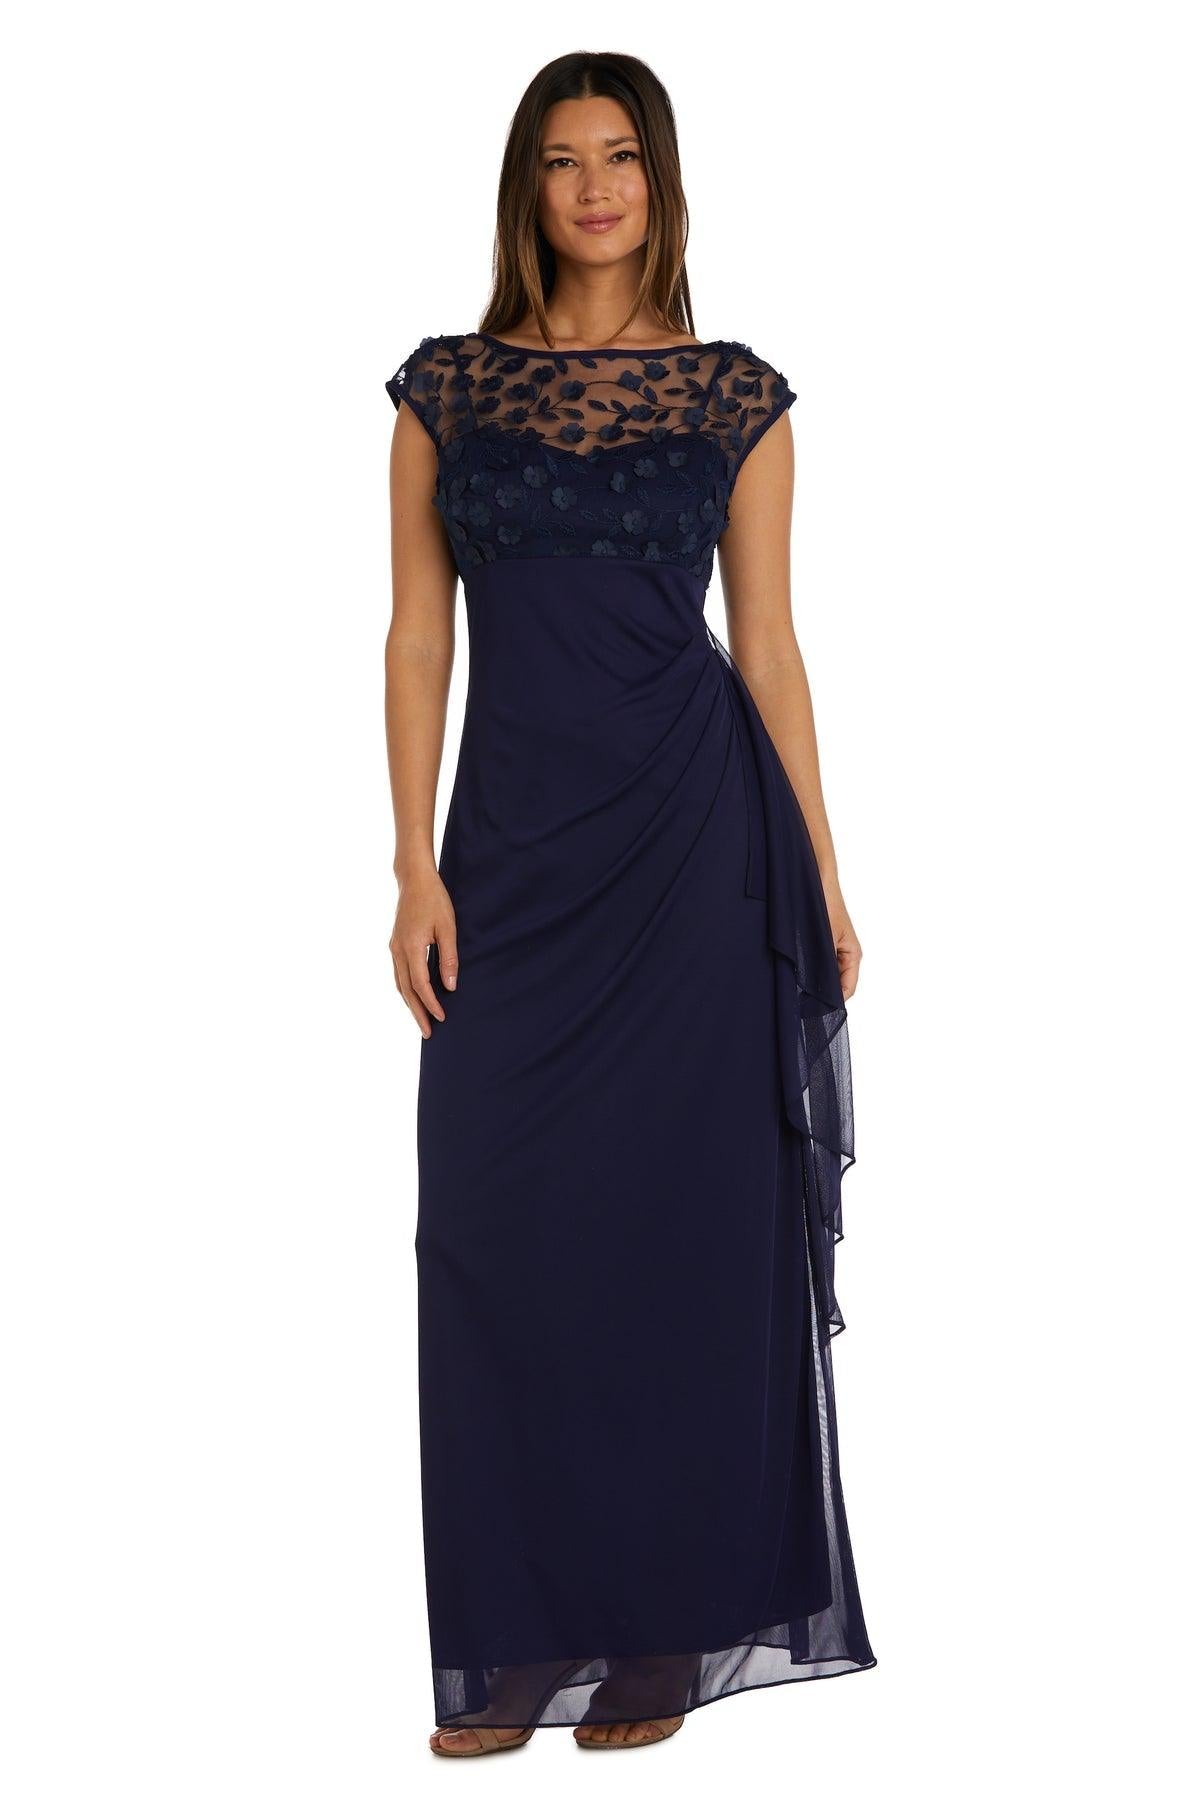 R&M Richards Long Mother of the Bride Dress 2741 - The Dress Outlet